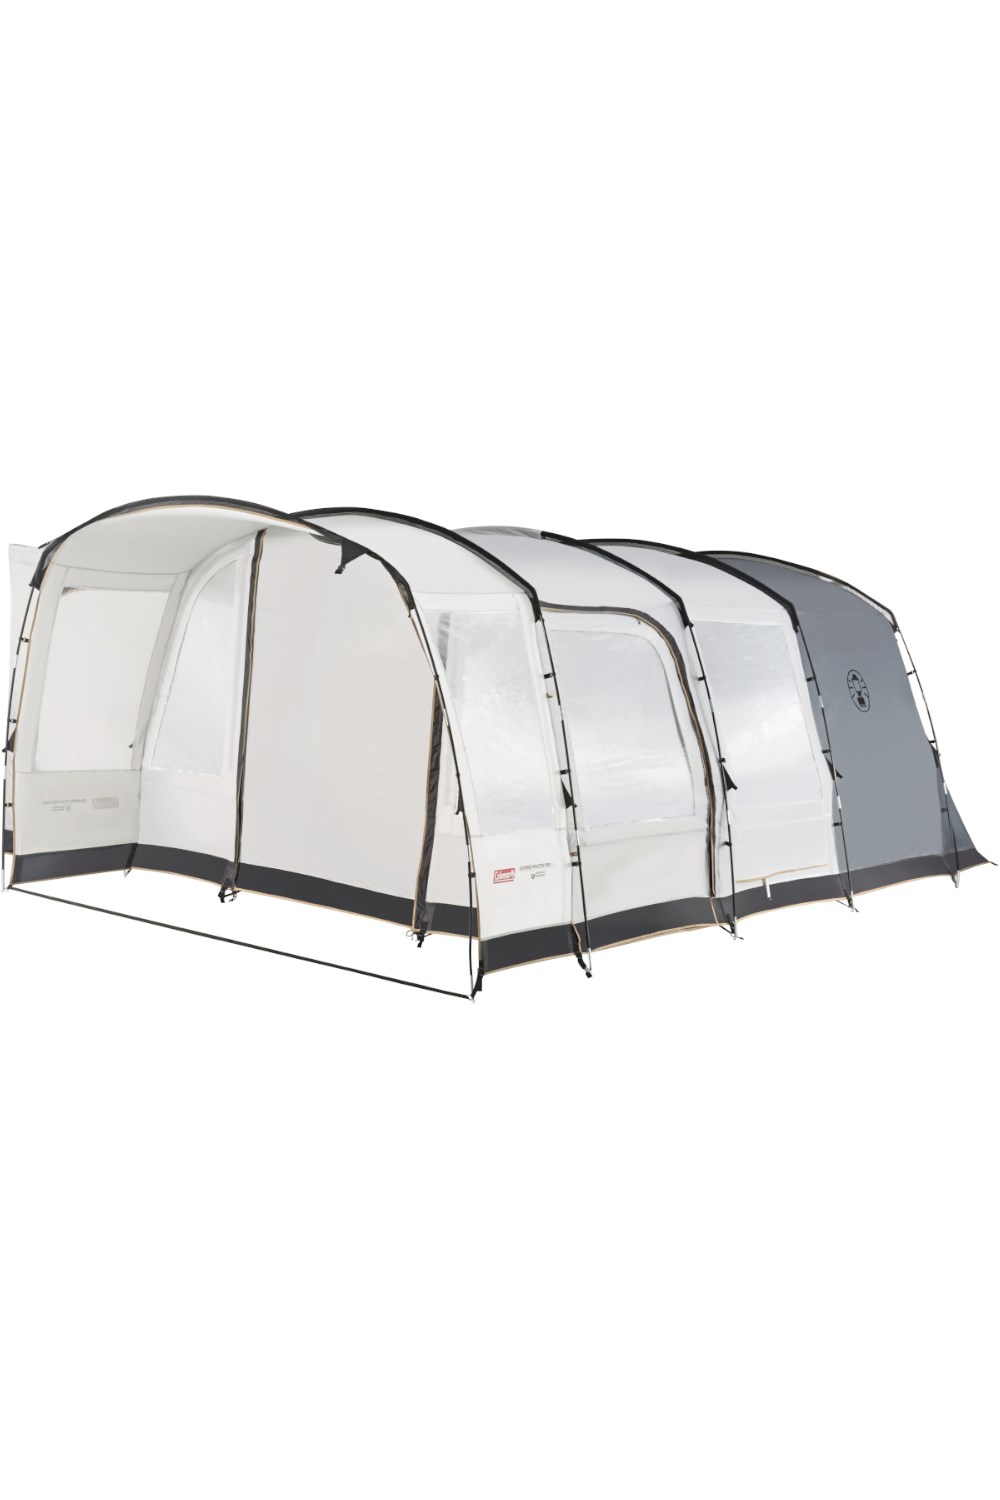 Factory Second Journeymaster Pro XL Awning -